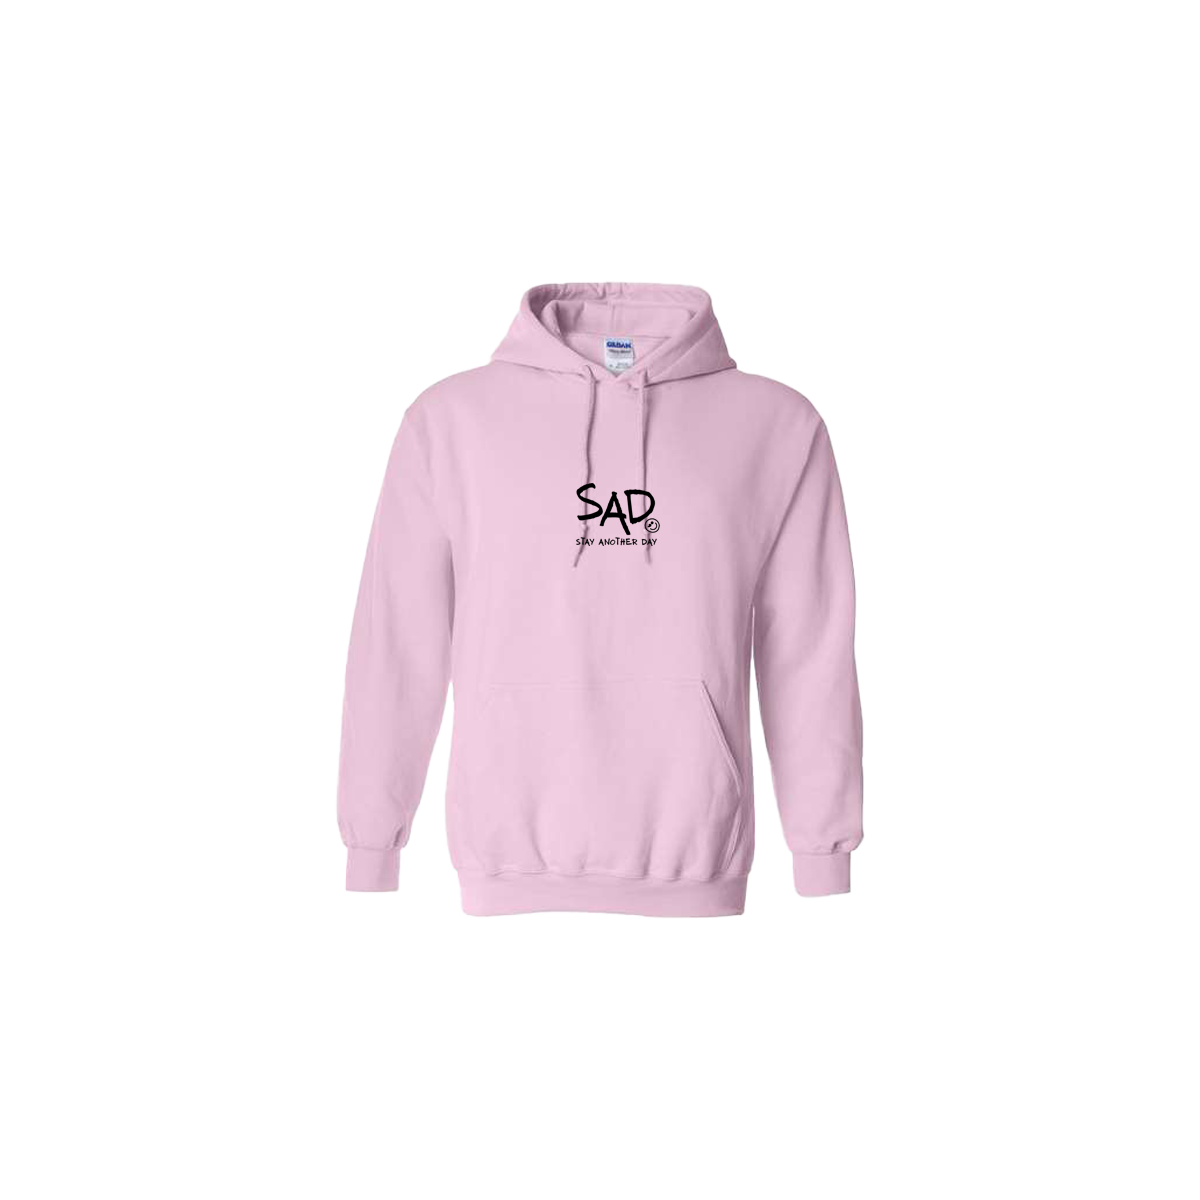 Stay Another Day - SAD Logo Embroidered Light Pink Hoodie - Mental Health Awareness Clothing